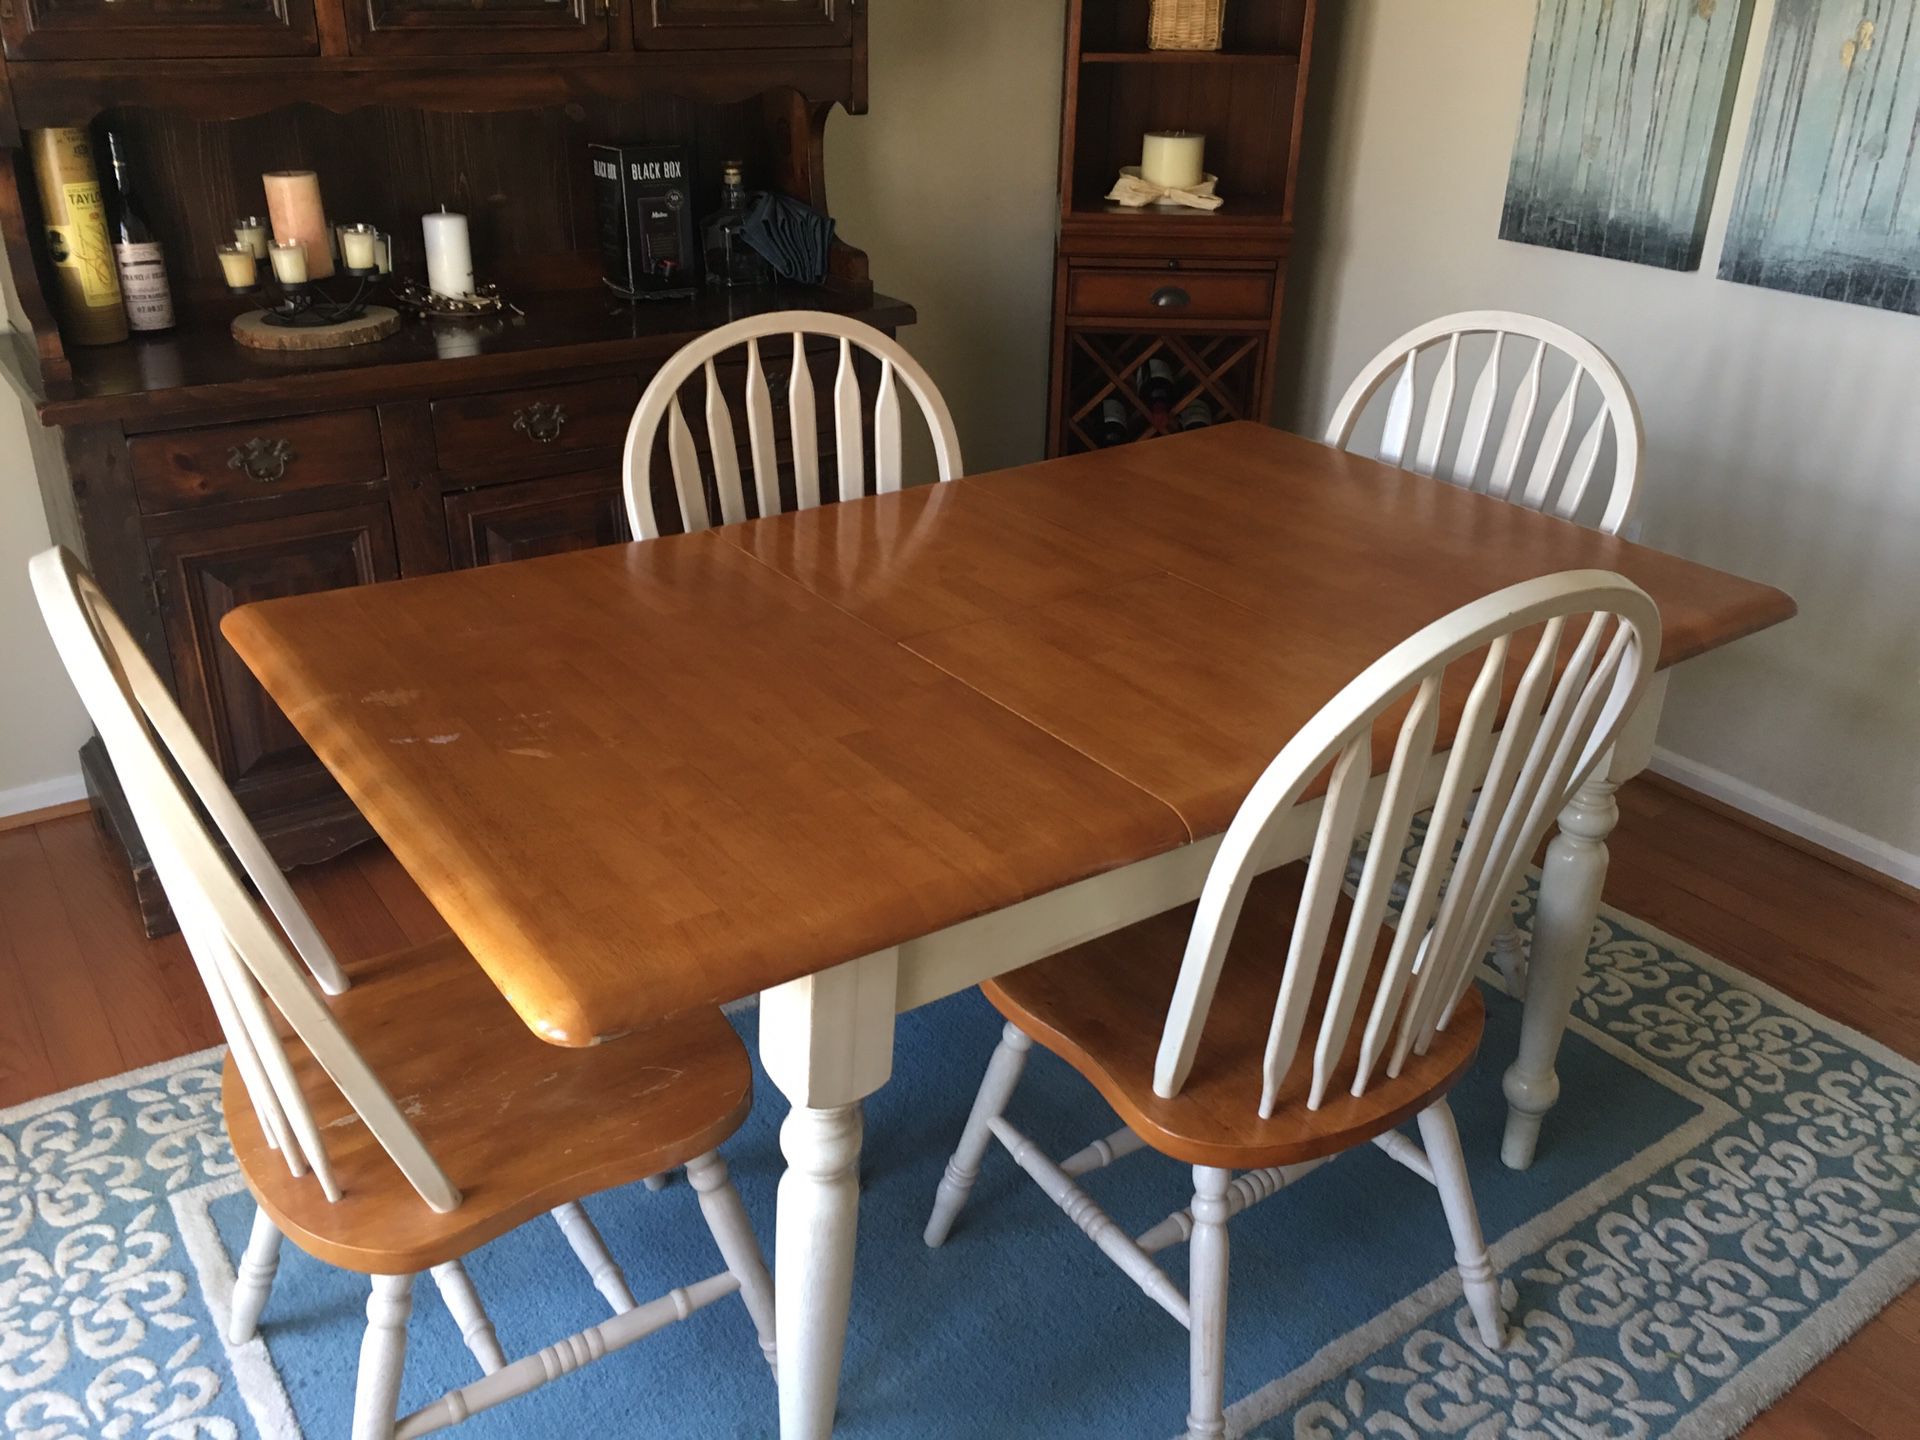 Farm style dining table with 4 chairs and fold away extension